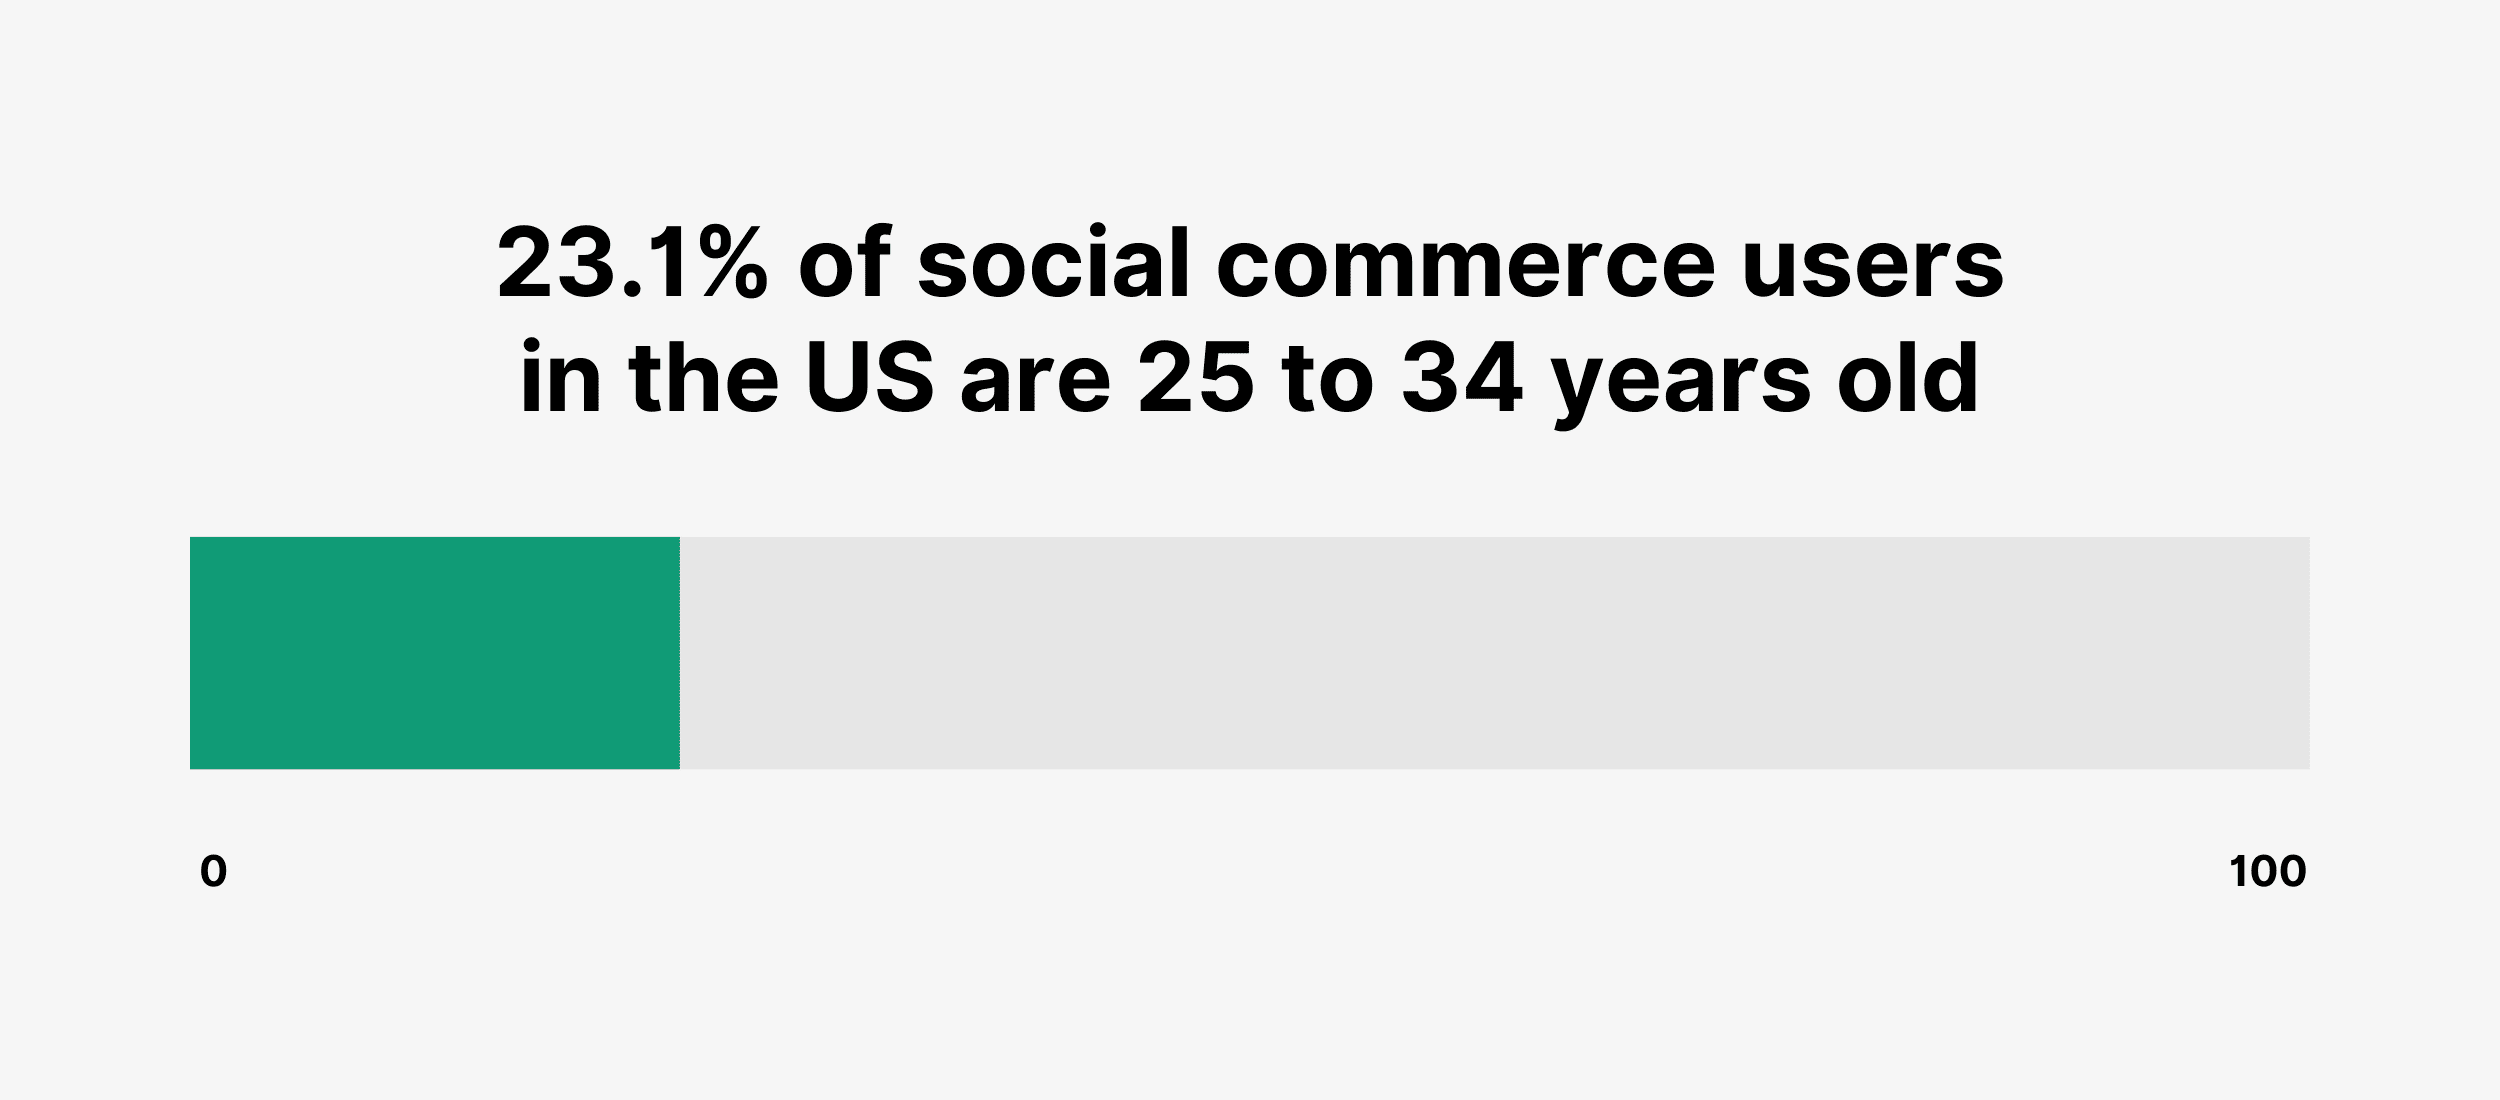 23.1% of social commerce users in the US are 25 to 34 years old